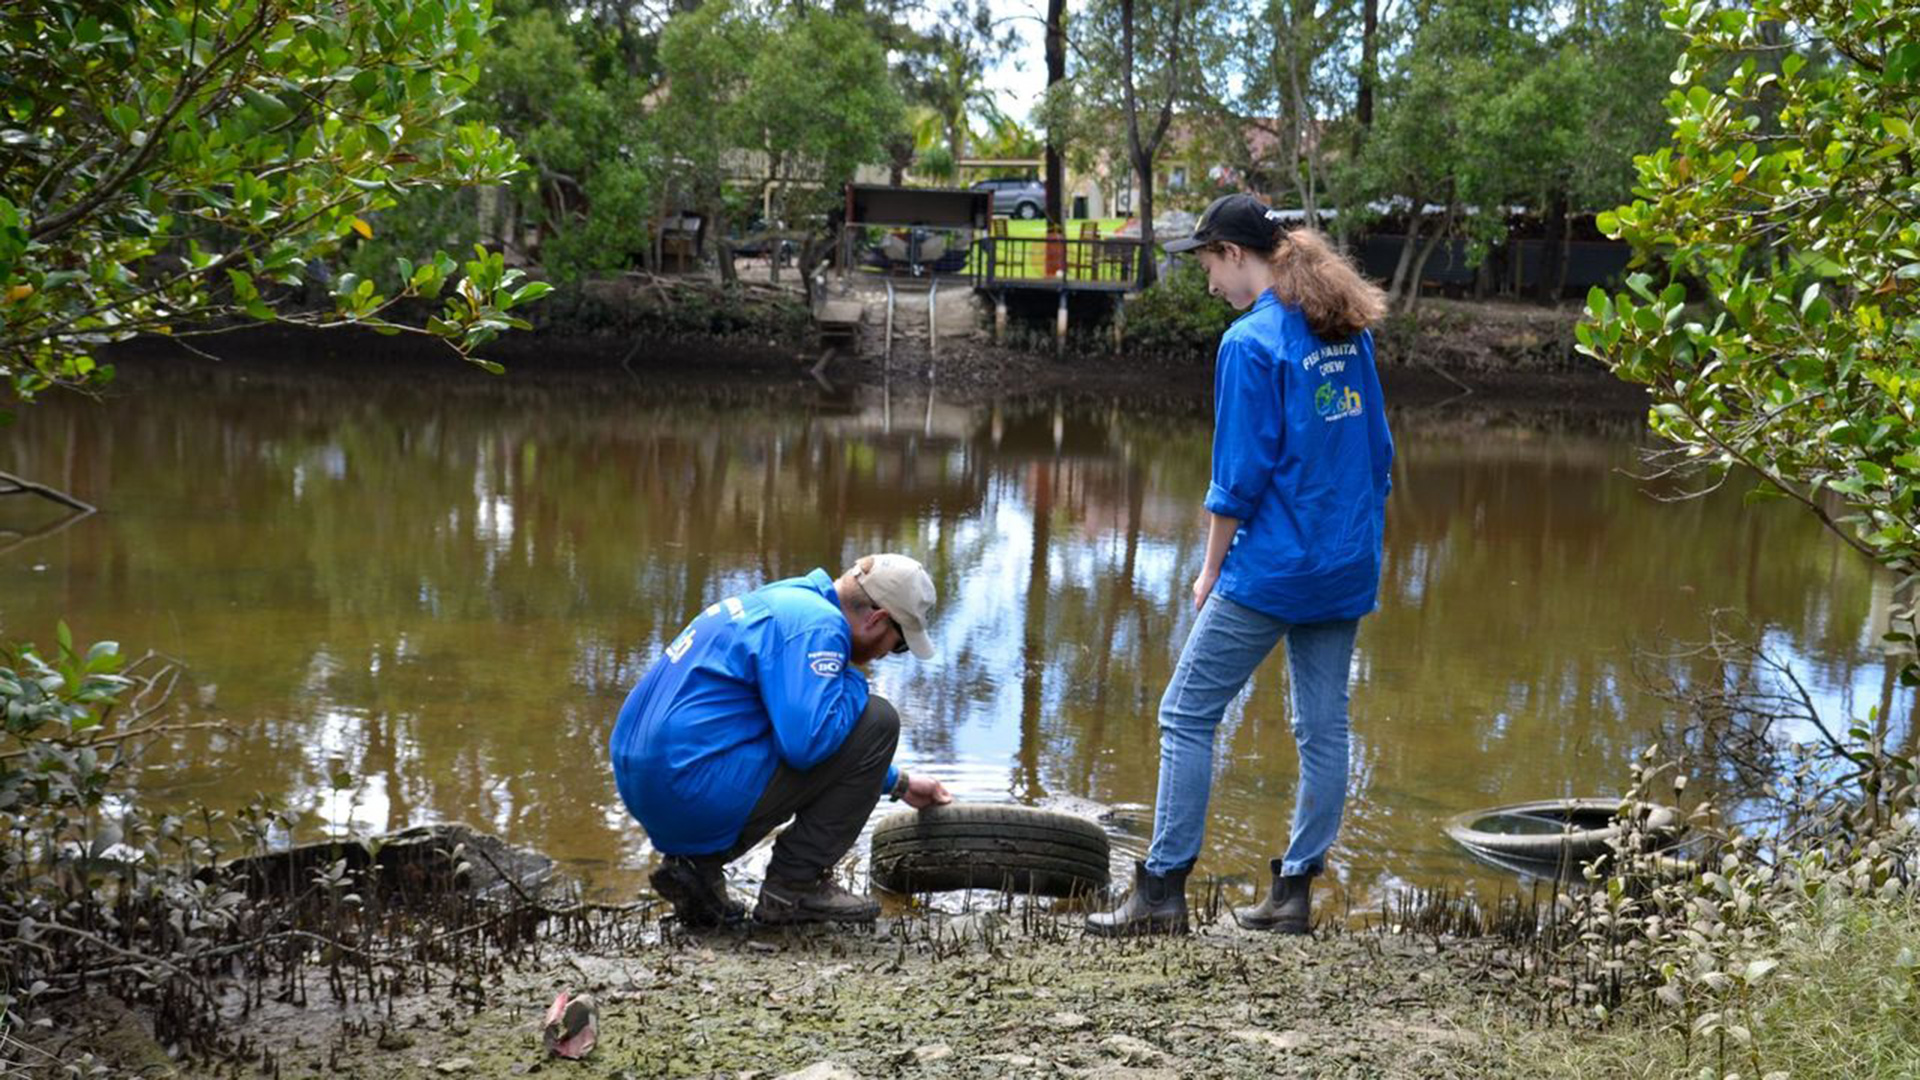 two people in blue shirts in front of a creek, one bending down pulling a tyre out of the water and the other person standing looking over them